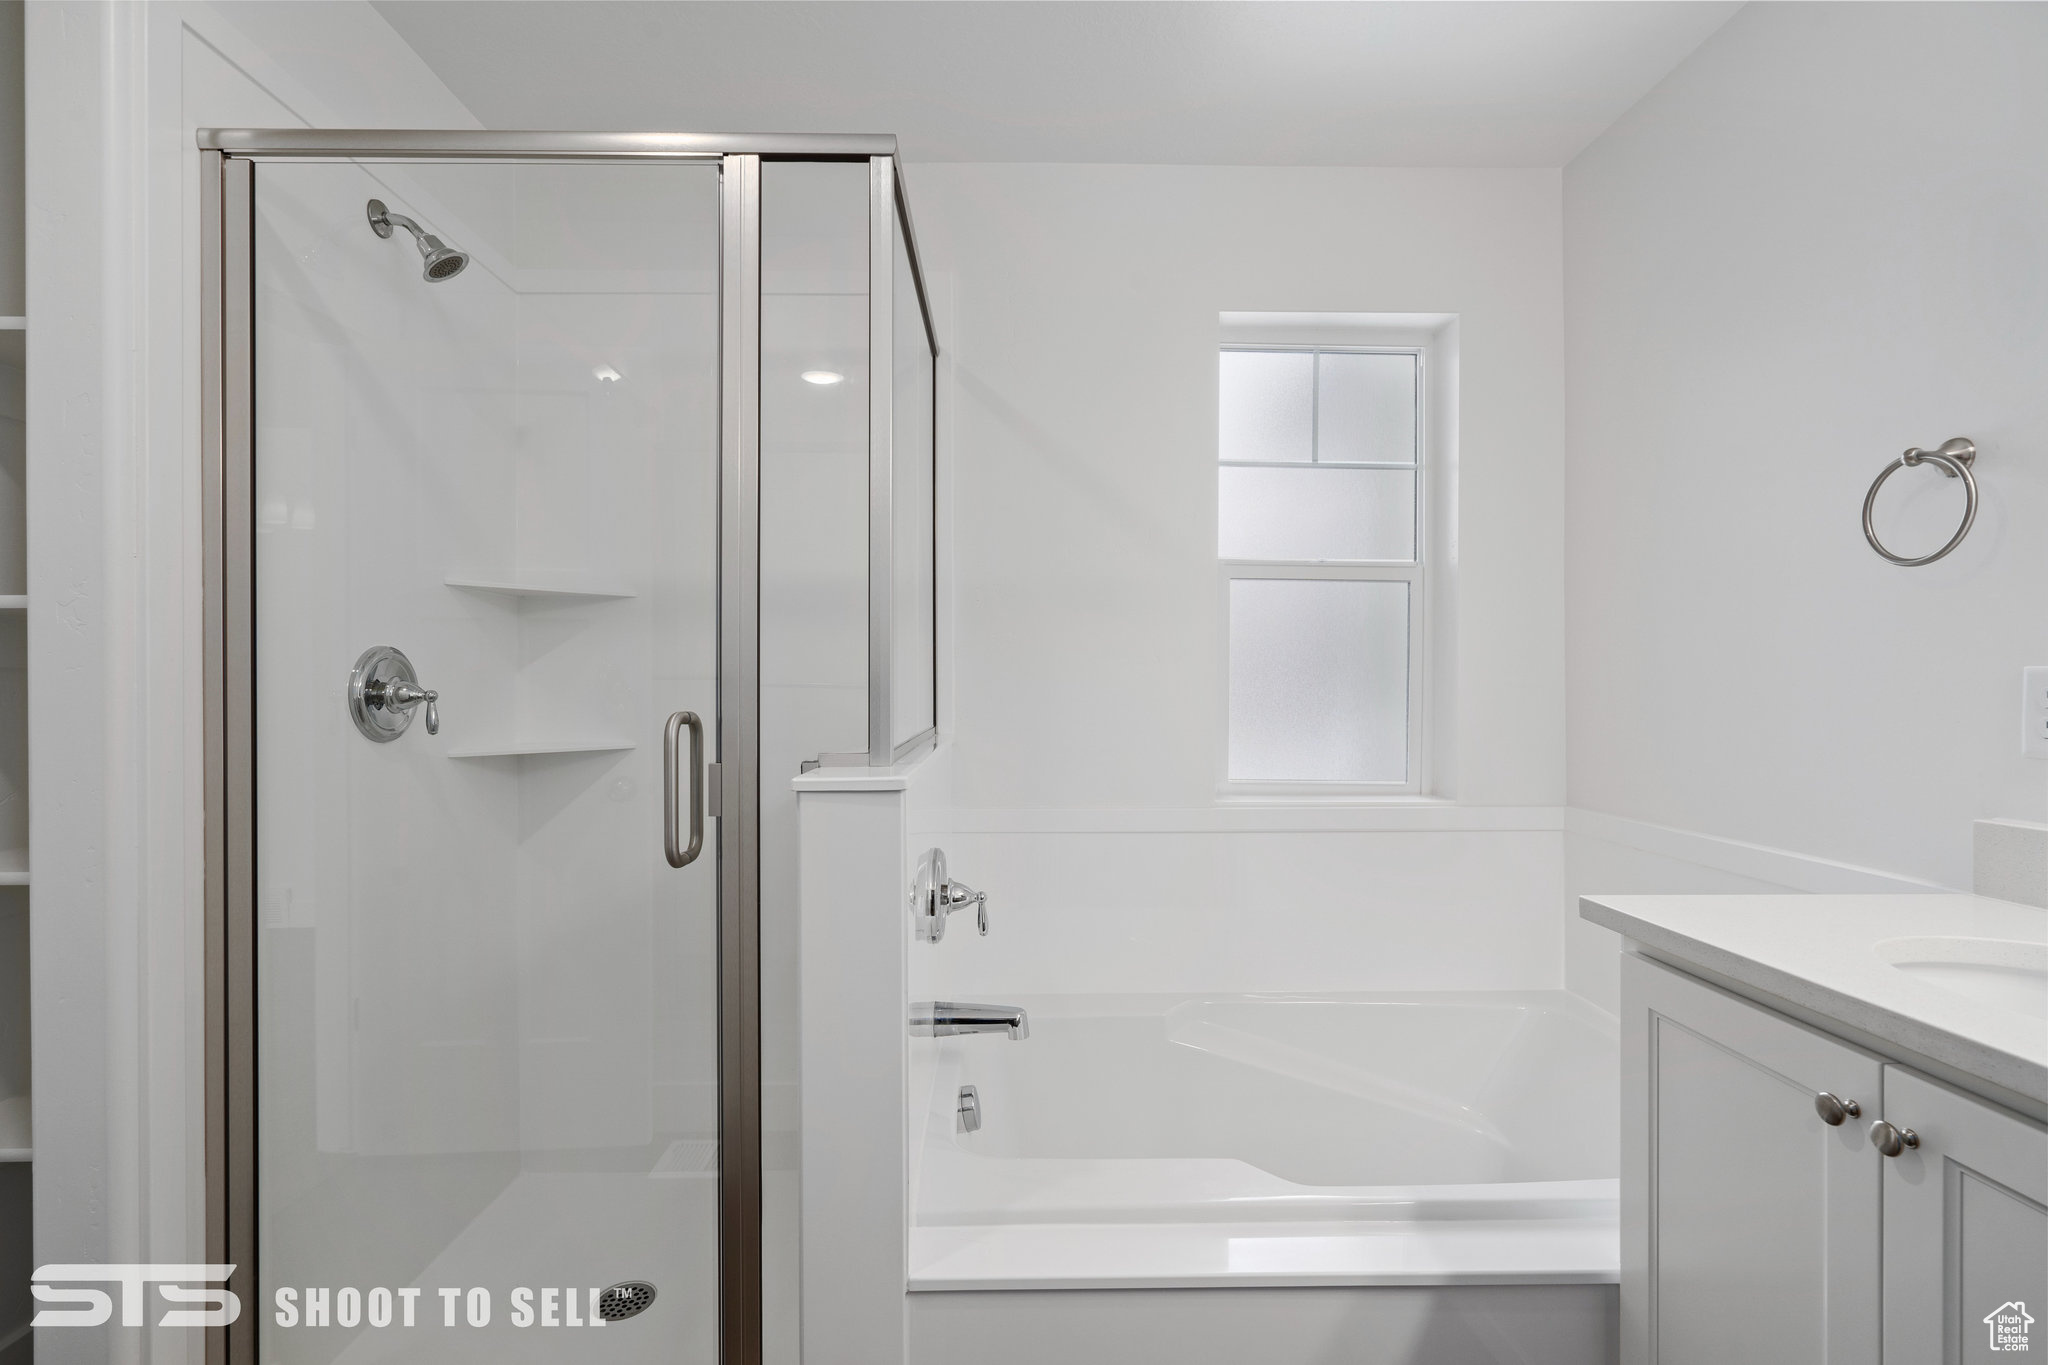 Separate Tub/Shower